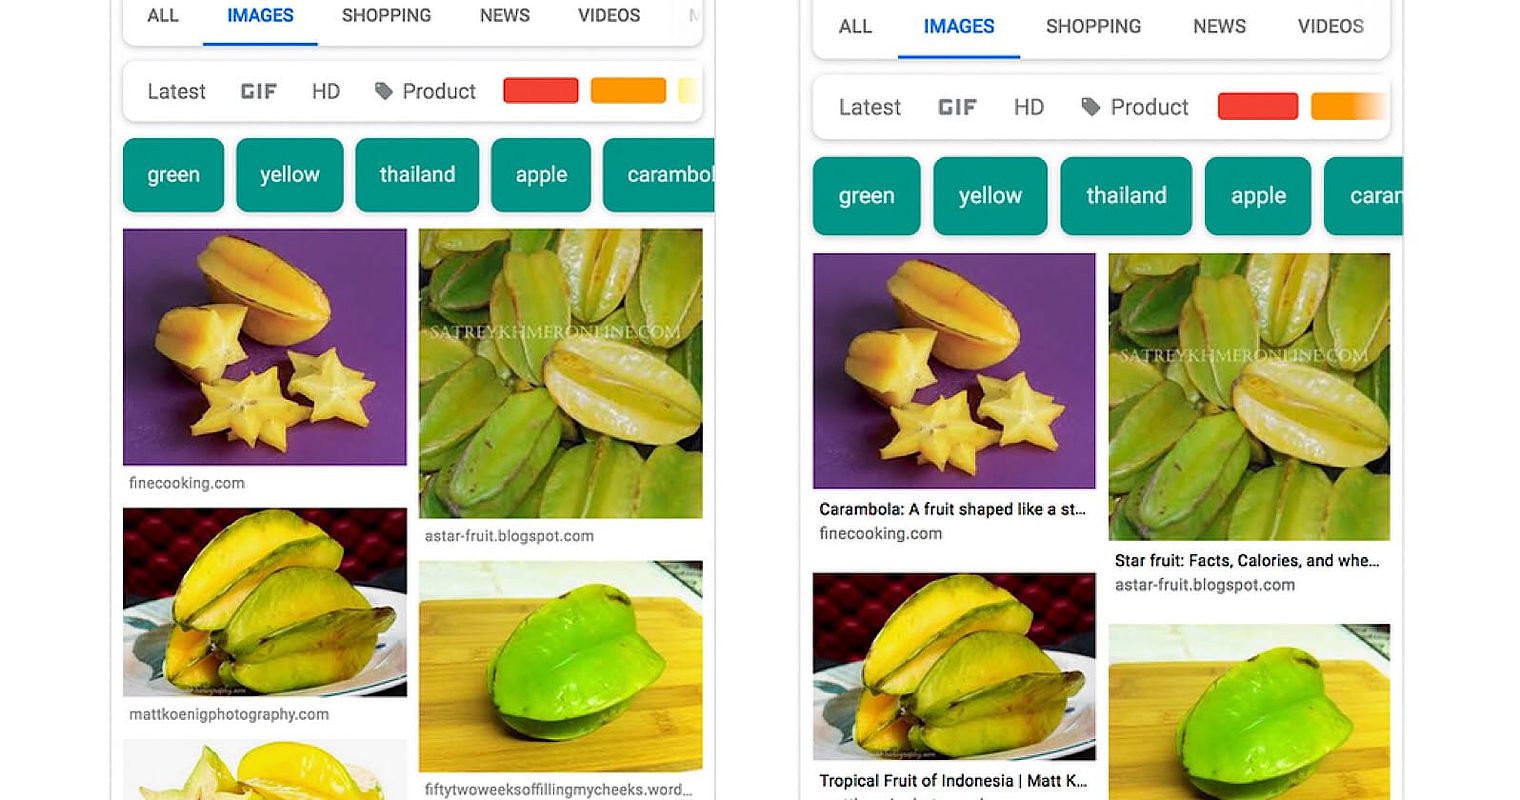 Google Adds Title Tags to Image Search Results